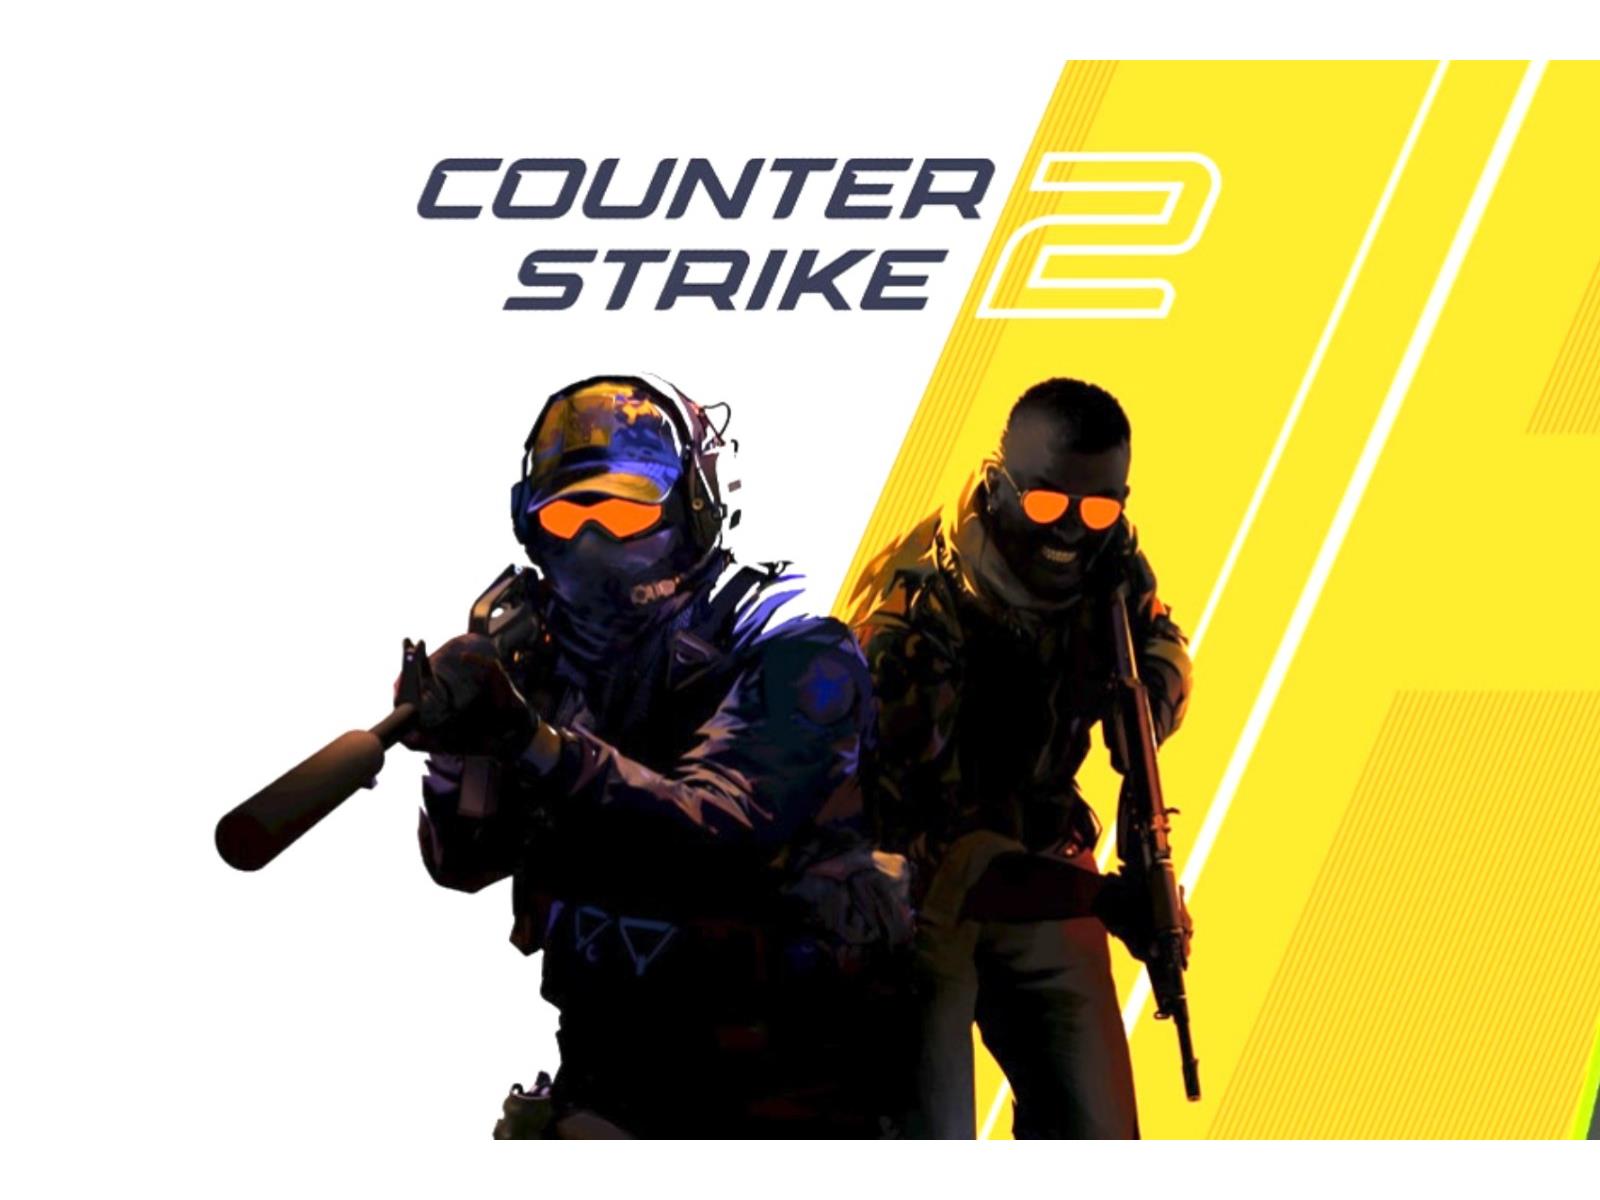 CSGO IS NOW COUNTER STRIKE 2.0 NEW UPDATE  LETS PLAY USING MY MINING GPU  5600XT 